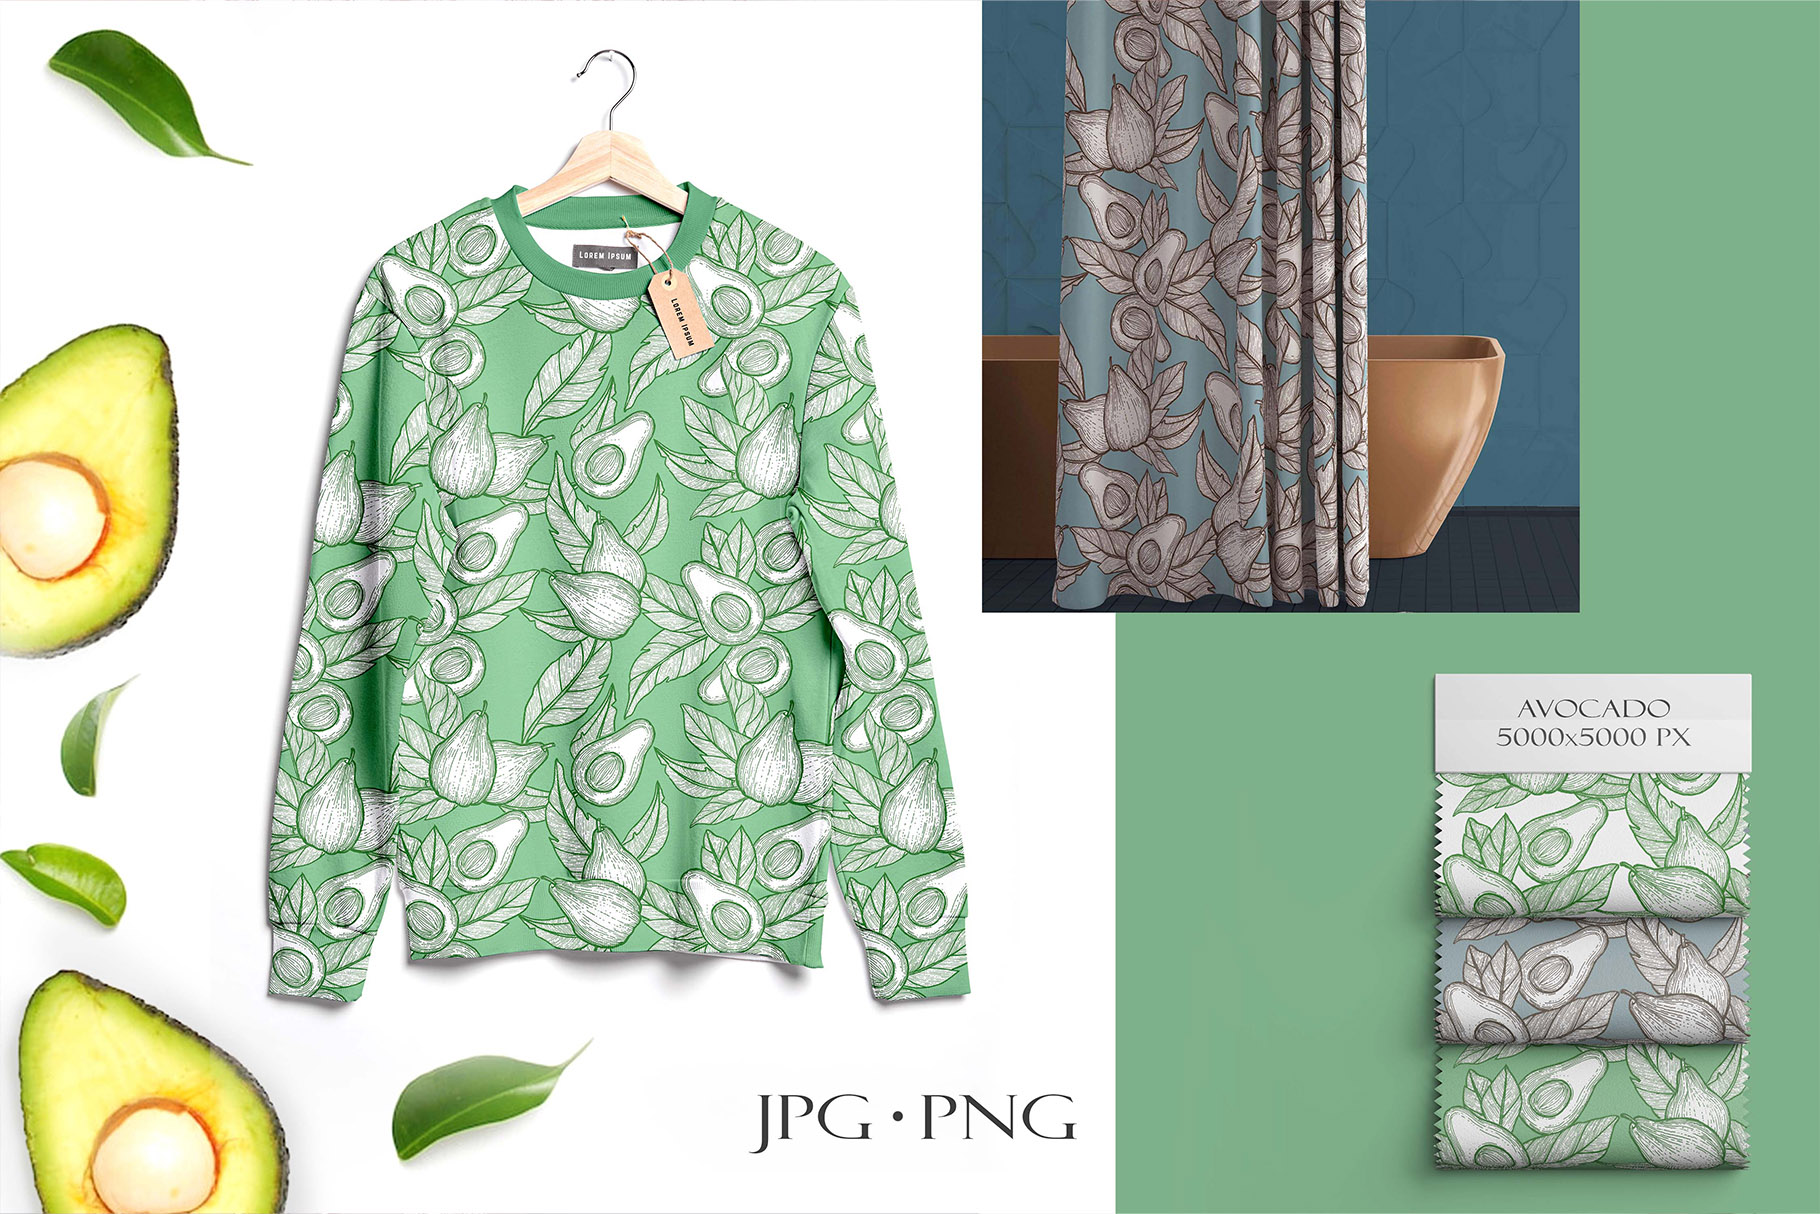 Green clothes with fruits prints.